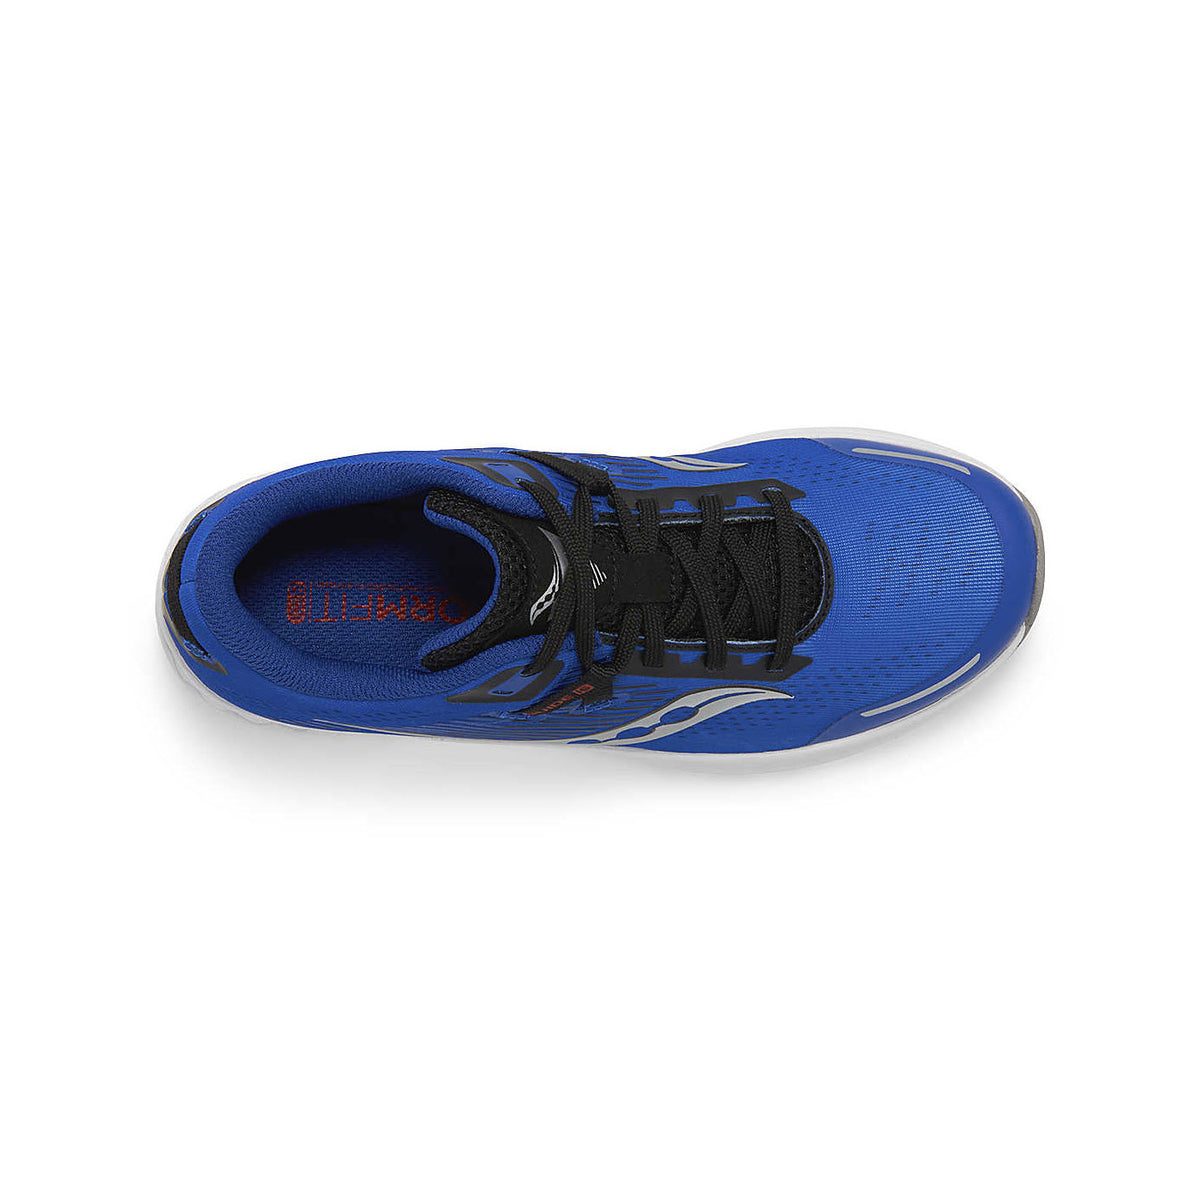 Top view of a single Saucony Guide 16 blue/black performance runner with black laces and a distinctive pattern on the side.